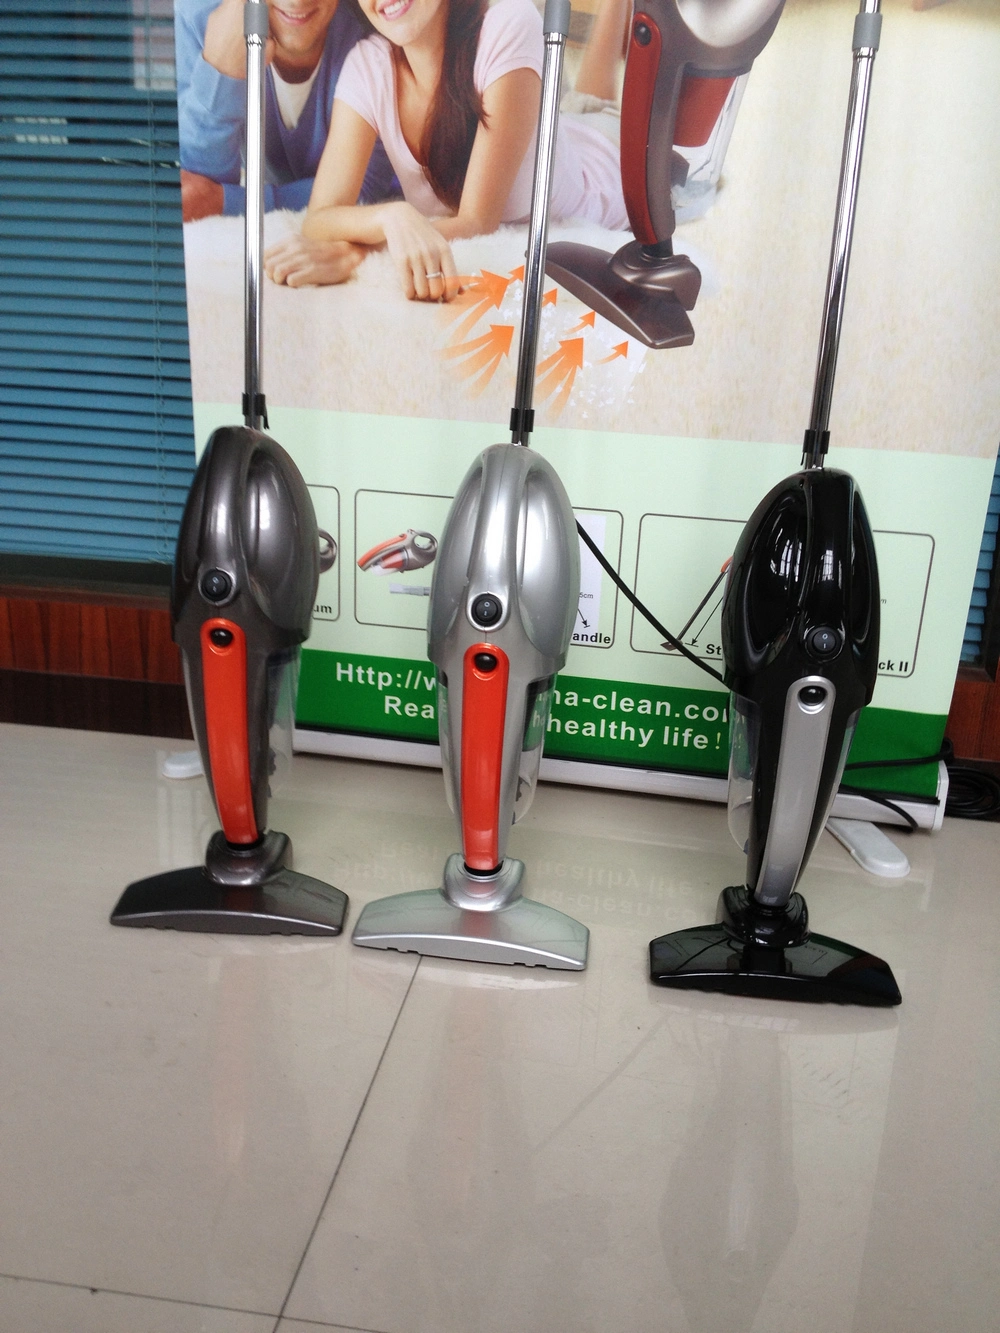 4 in 1 Vacuum & Blower, Stick &Handle Vacuum Cleaner for Home and Car Use